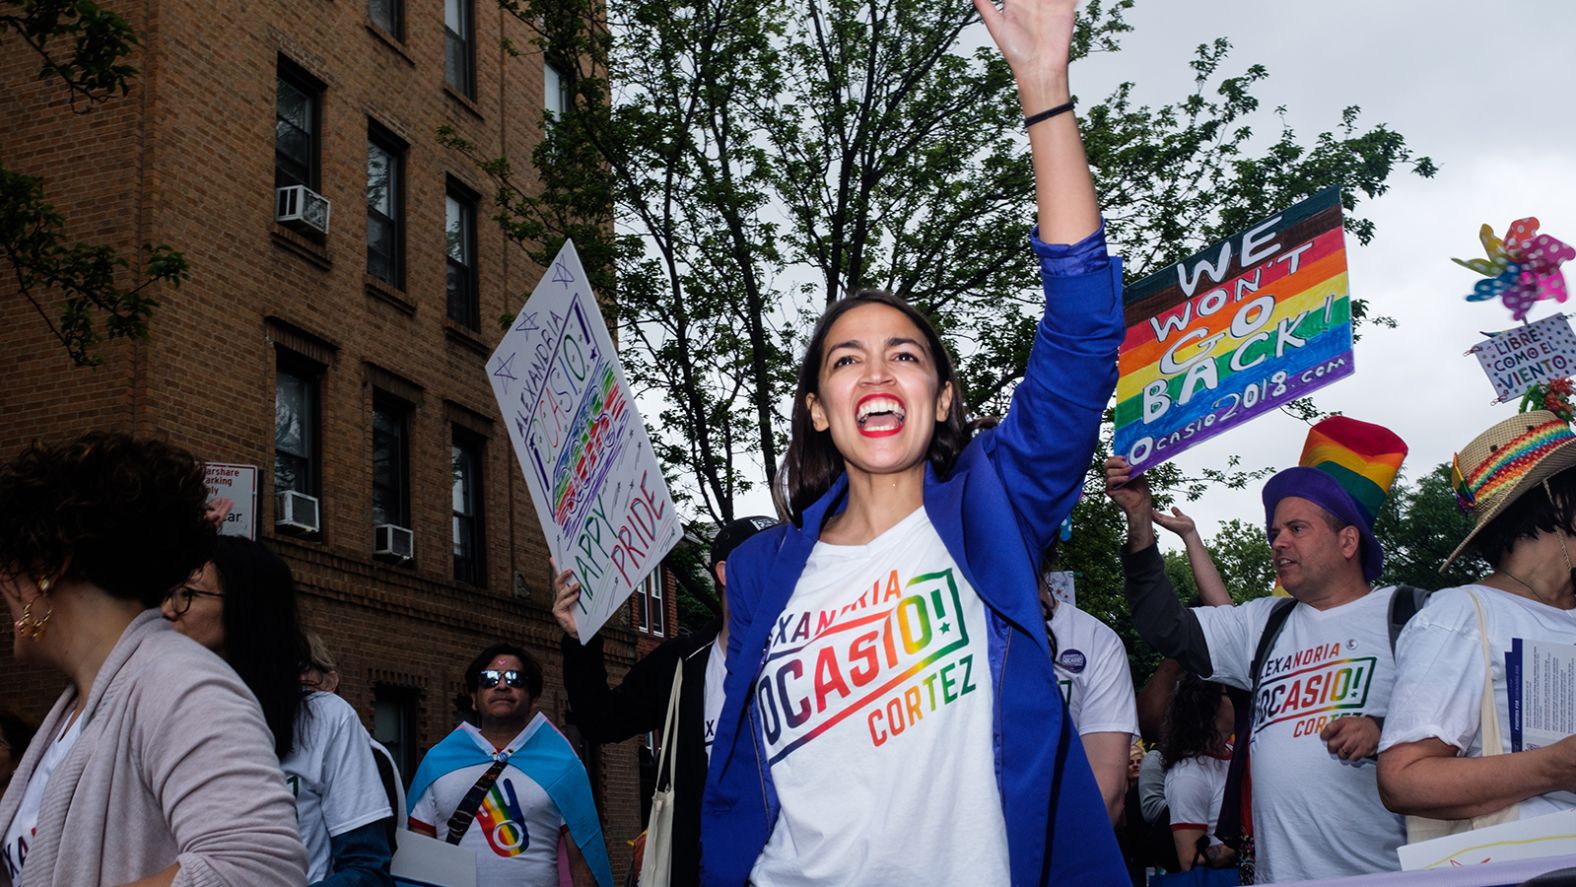 Ocasio-Cortez marches in a Pride parade earlier this month. She was born and raised in the Bronx, the daughter of working-class Puerto Rican parents.